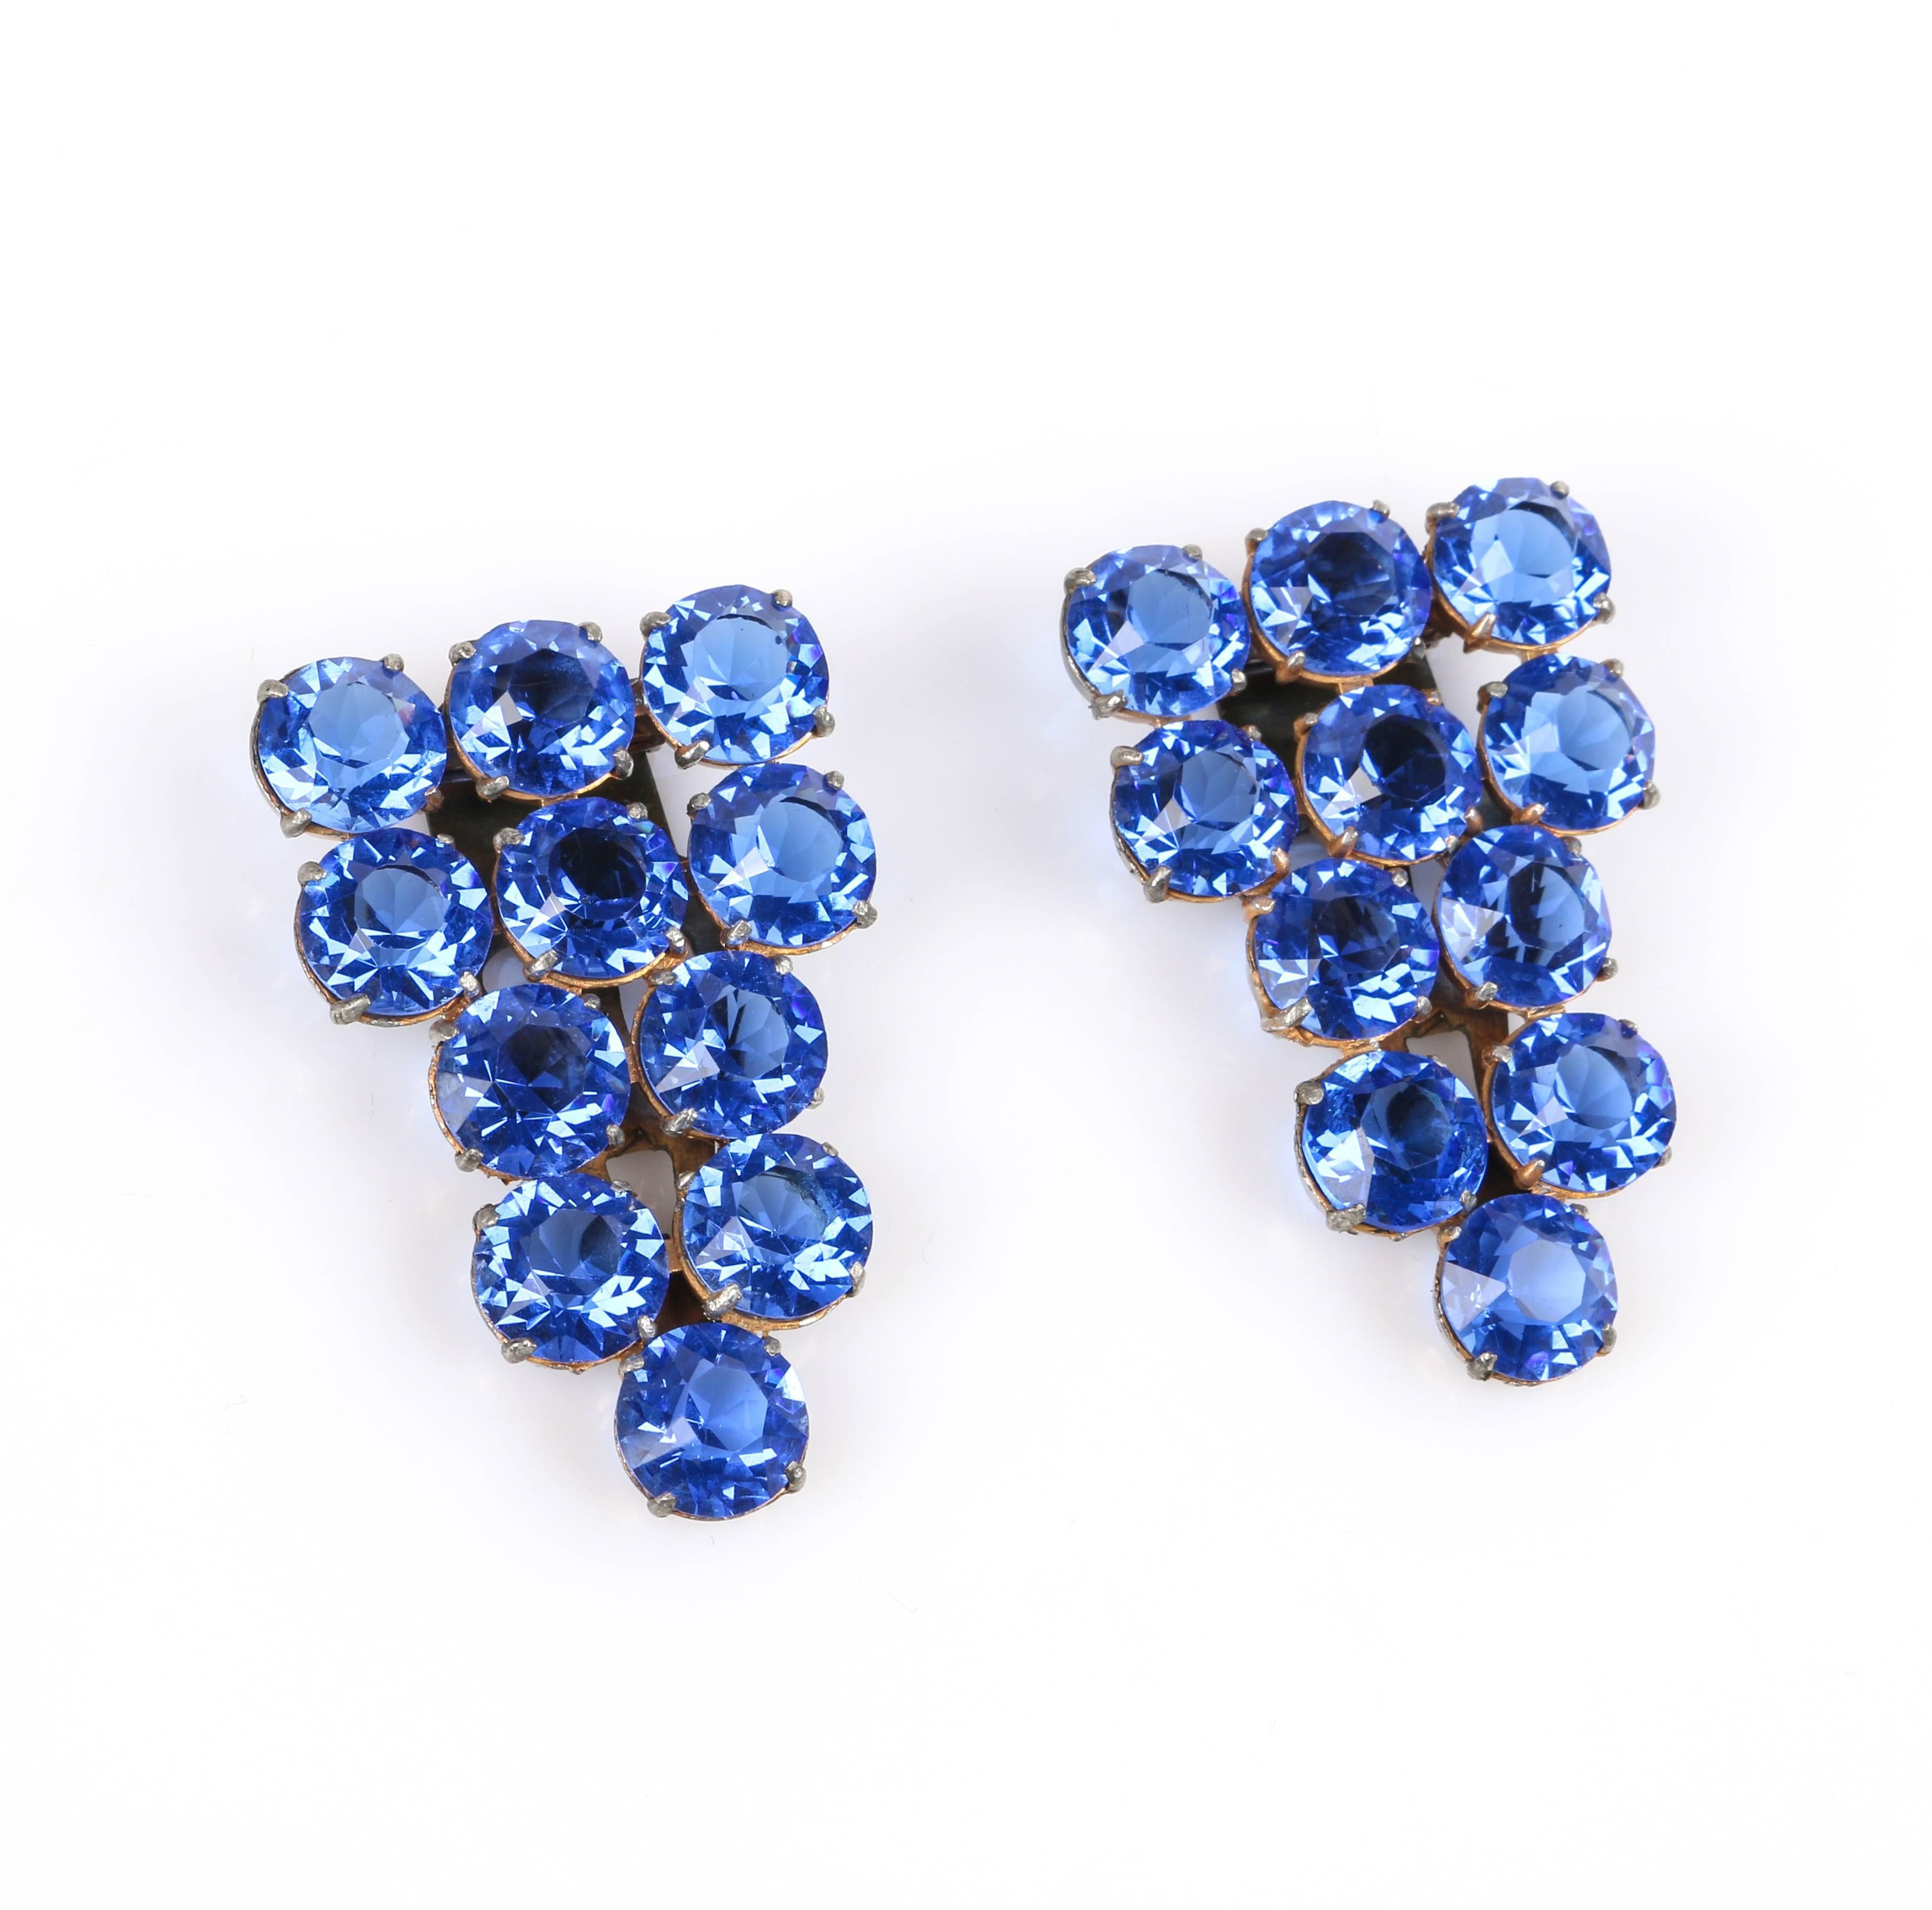 Striking vintage c.1930's two piece sapphire blue crystal rhinestone dress / fur clips set. Eleven prong set round faceted sapphire blue crystal rhinestones. Gold-toned metal open work setting. Hinged brass-toned metal pronged clasp with ornate